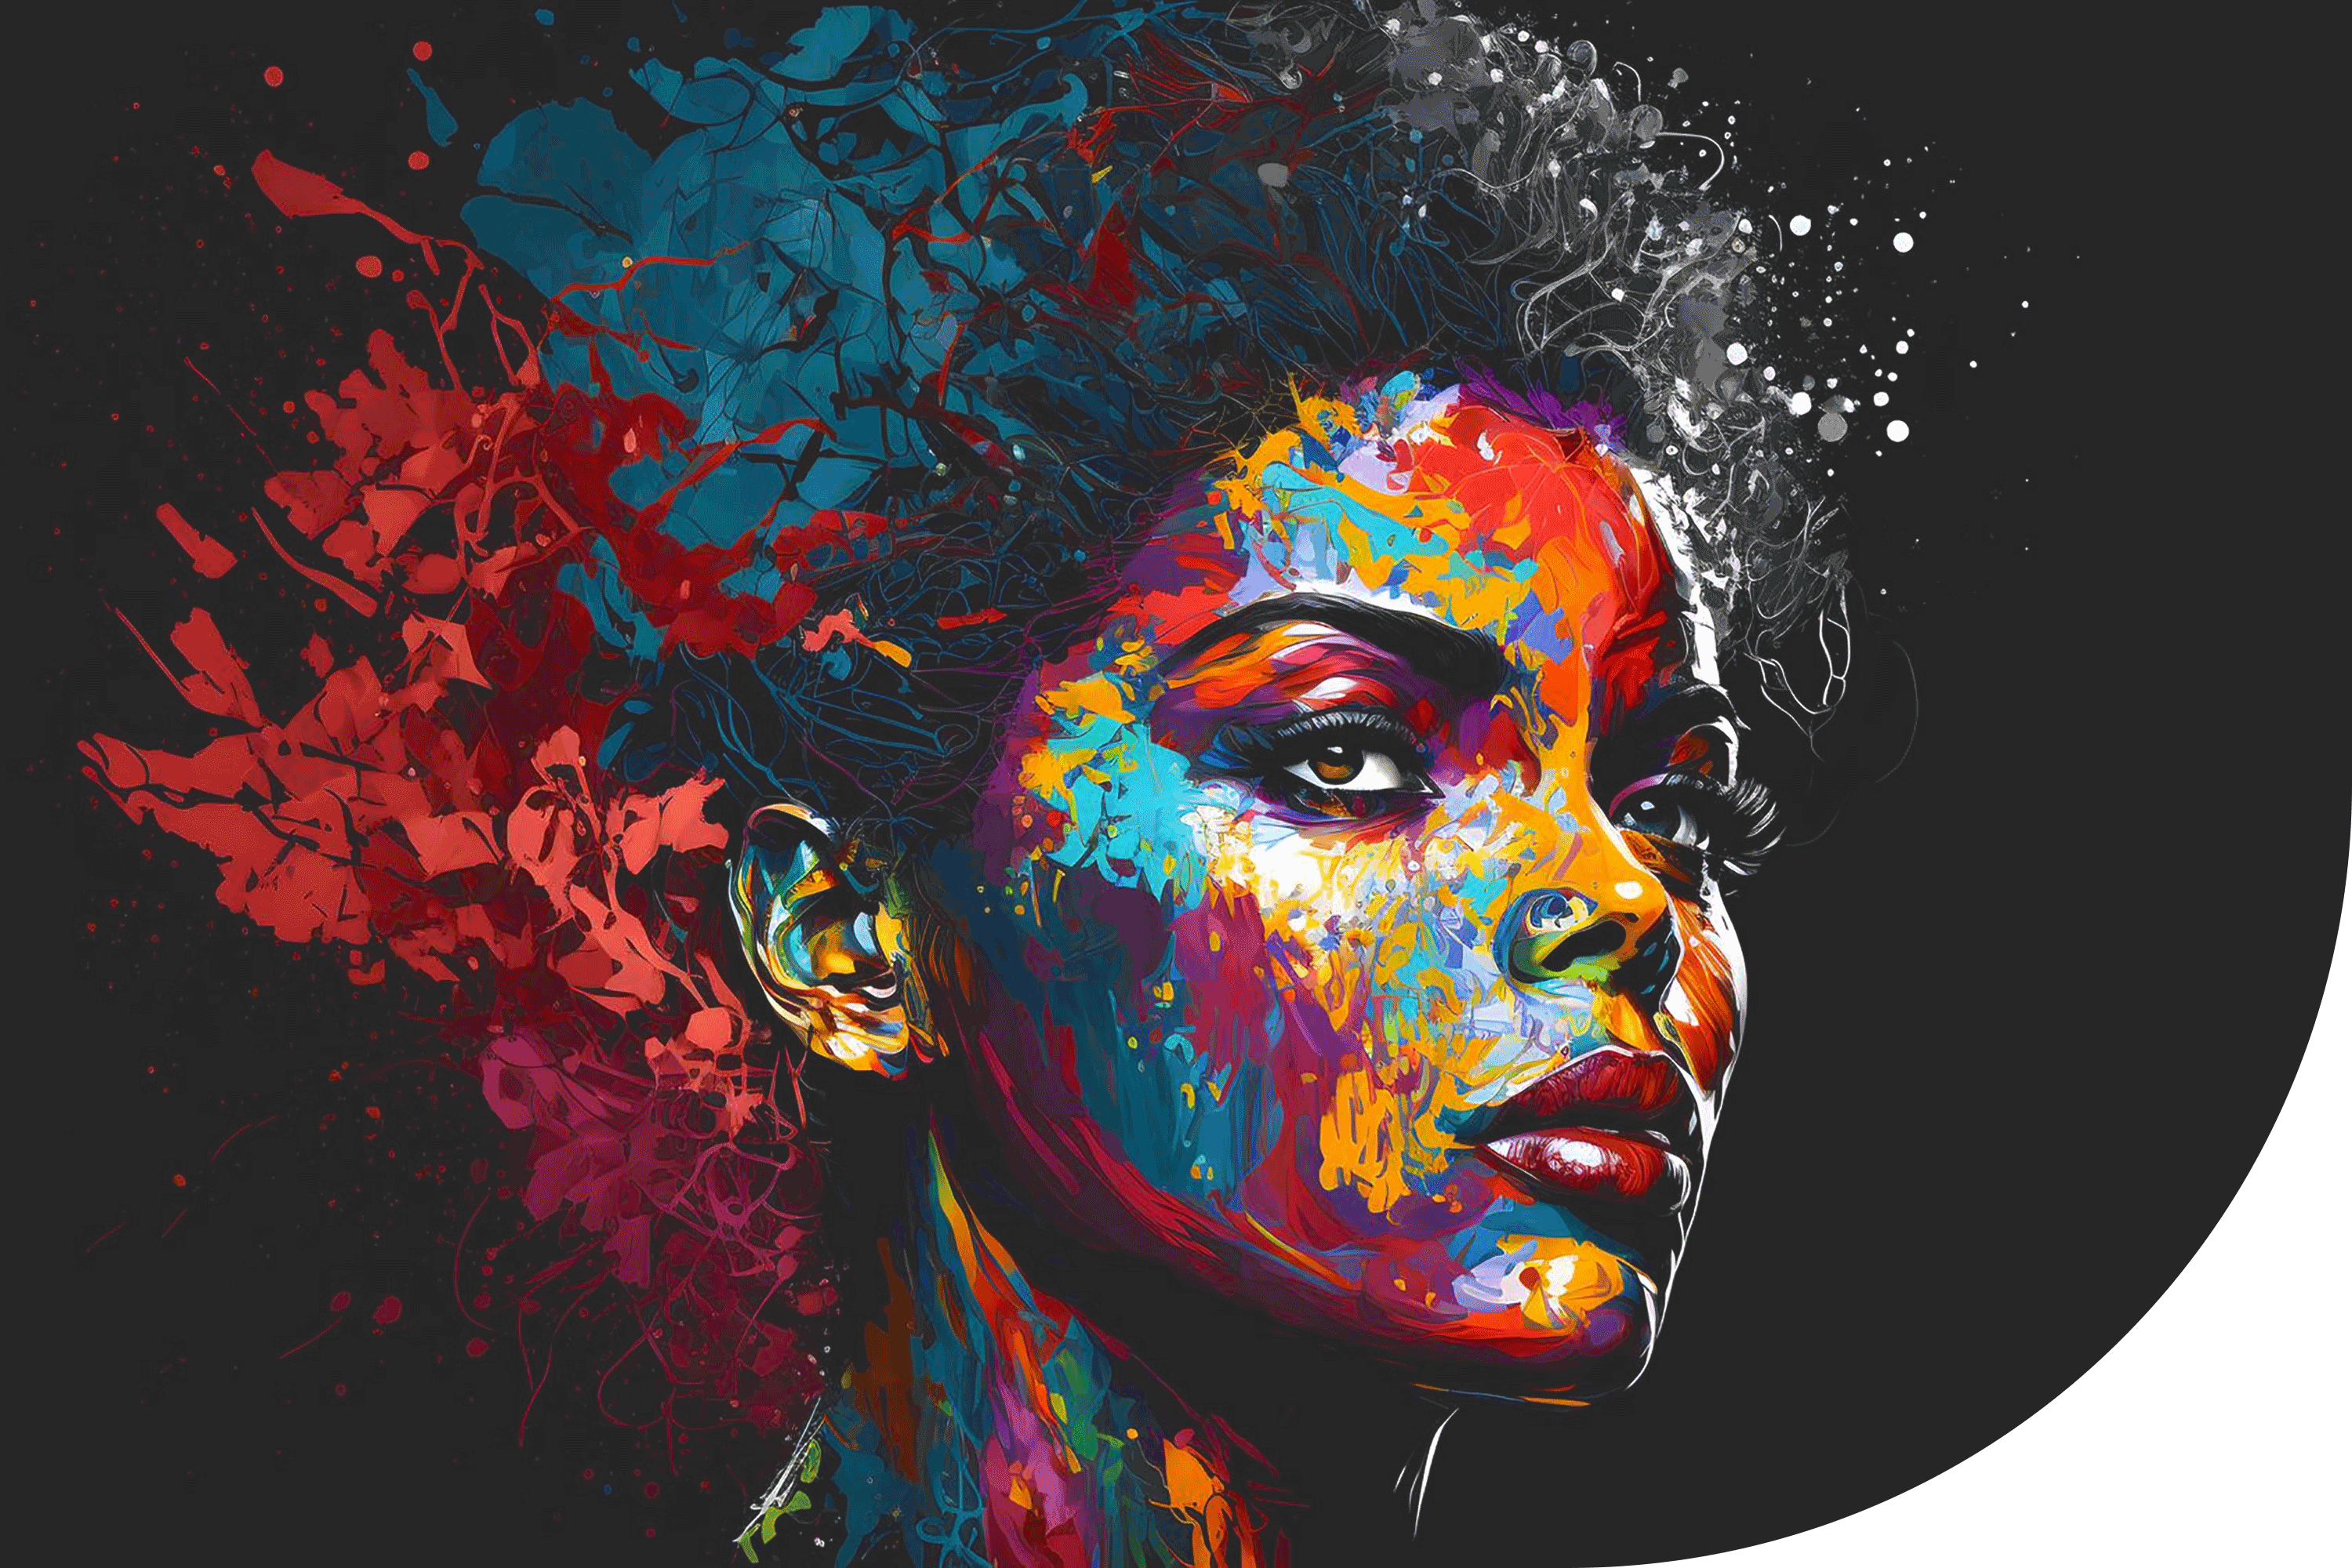 Digital art portrait of a woman with vibrant, multicolored paint splashes blending into her skin and hair against a dark background.